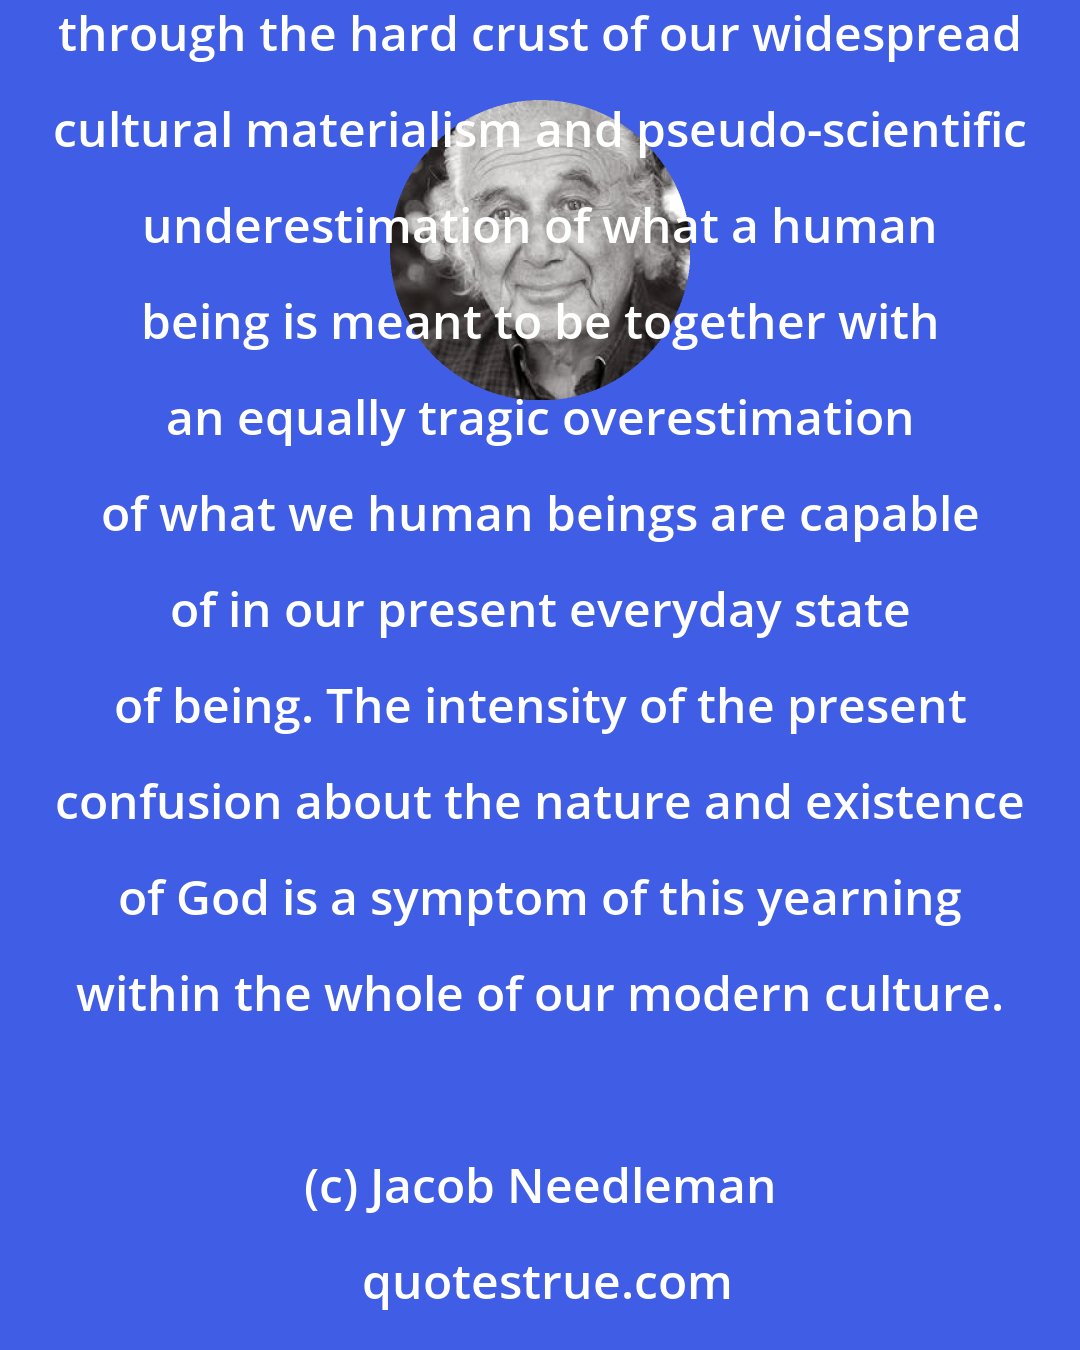 Jacob Needleman: At the present moment in our culture this yearning for meaning and consciousness, this yearning to give and serve something higher than ourselves, is breaking through the hard crust of our widespread cultural materialism and pseudo-scientific underestimation of what a human being is meant to be together with an equally tragic overestimation of what we human beings are capable of in our present everyday state of being. The intensity of the present confusion about the nature and existence of God is a symptom of this yearning within the whole of our modern culture.